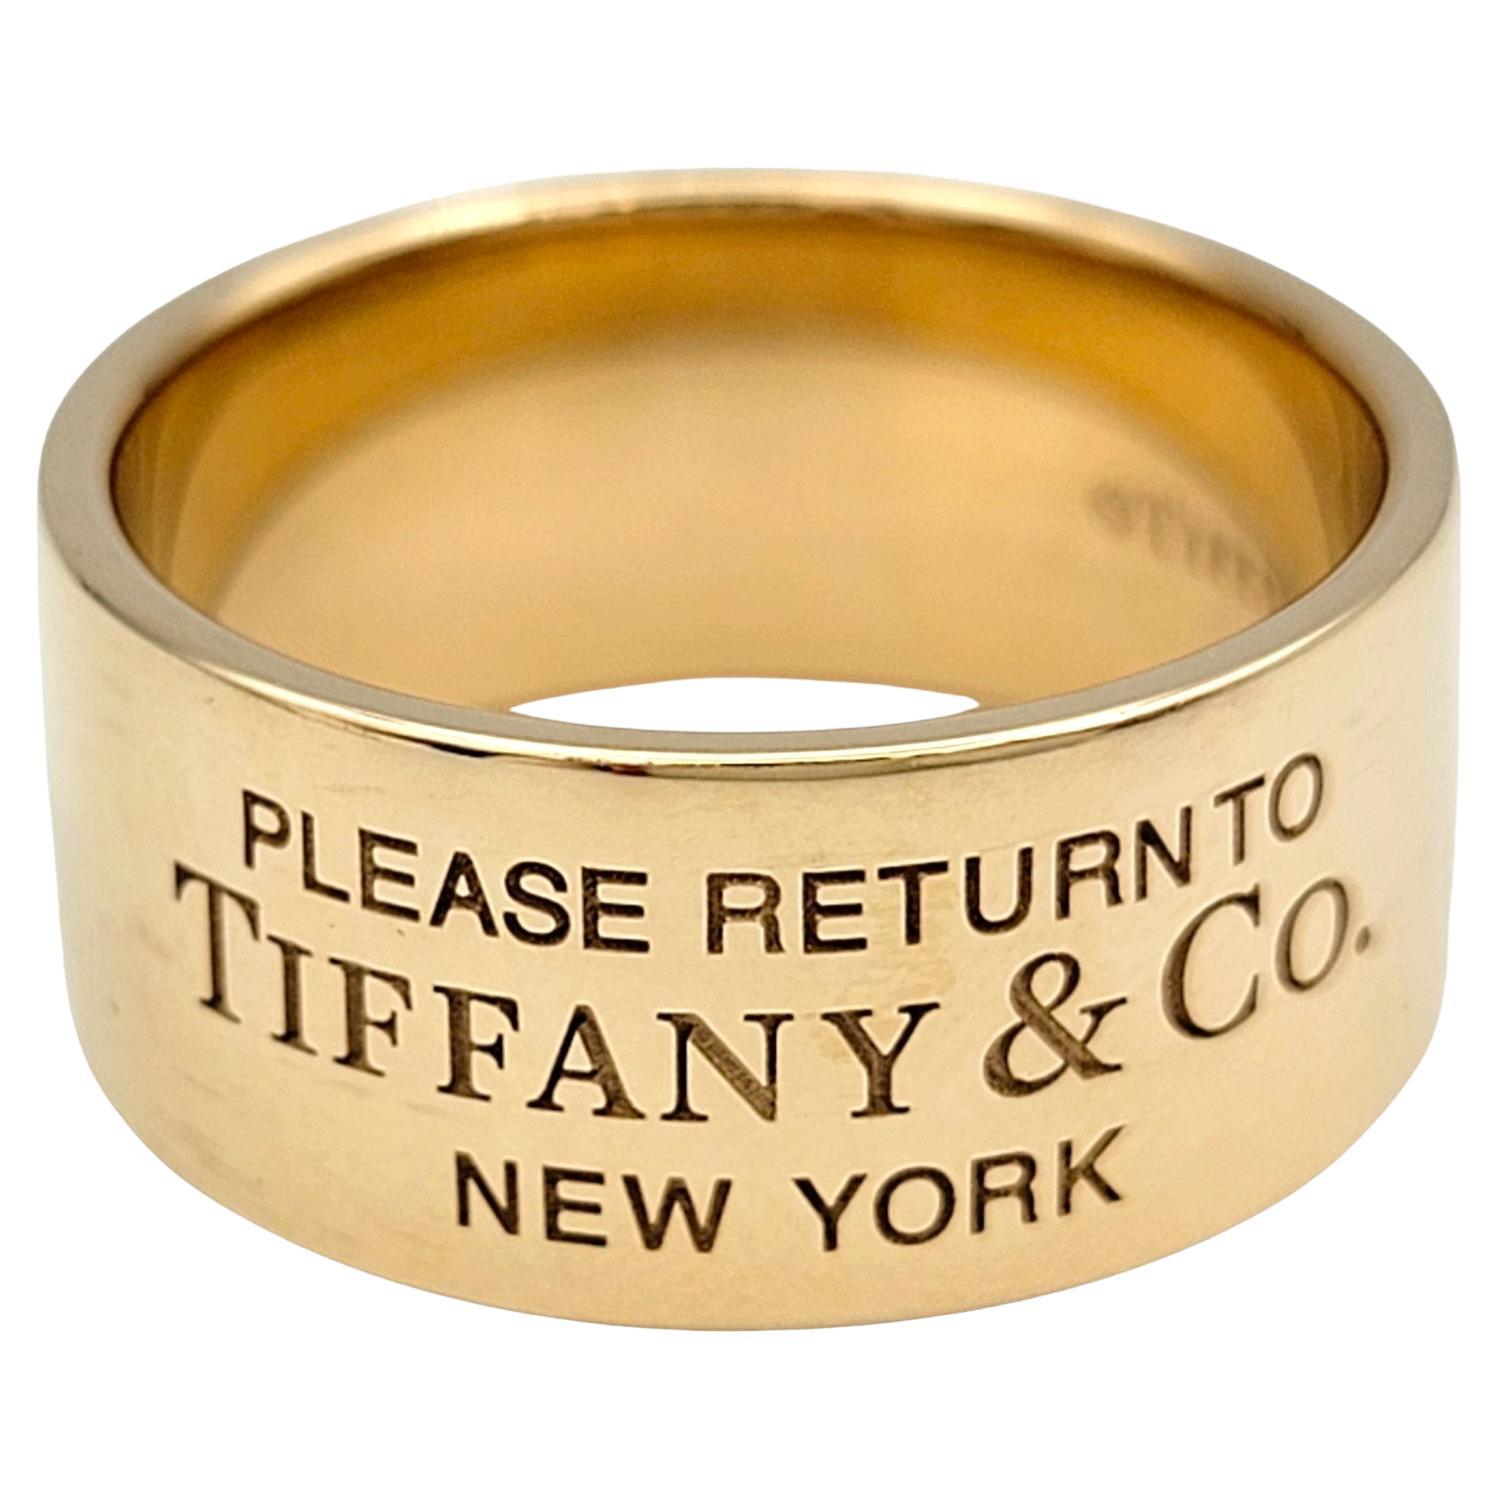 Ring Size: 10

This beautiful Tiffany & Co. band ring set in 18 karat rose gold, belonging to the renowned 